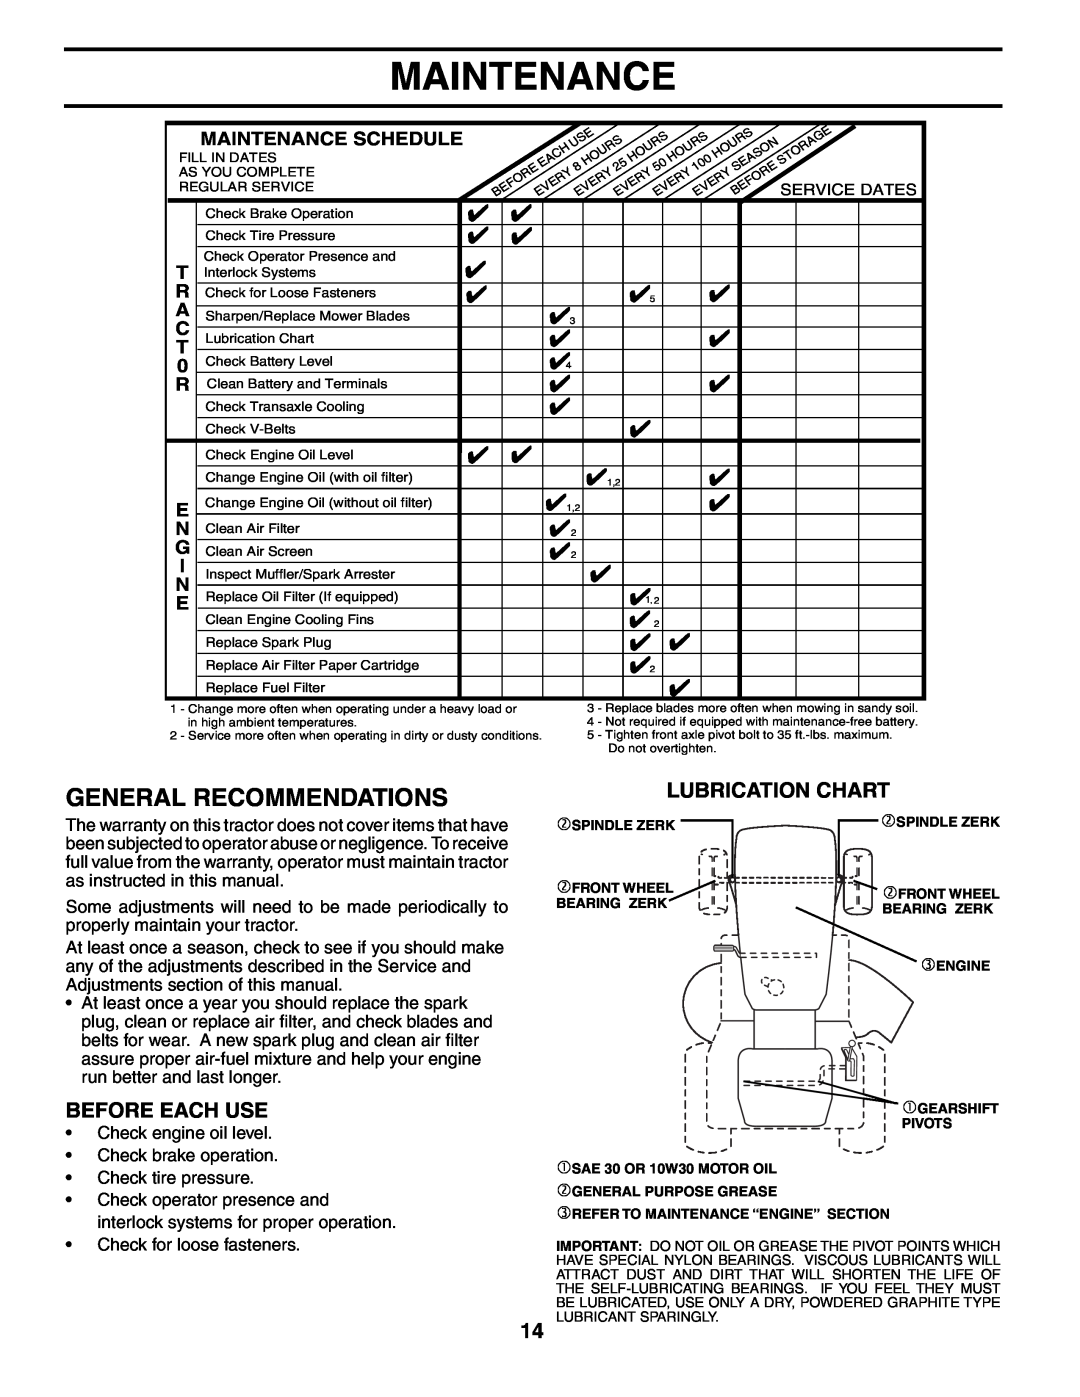 Poulan PO17542STB manual Maintenance, General Recommendations, Before Each Use, Lubrication Chart 